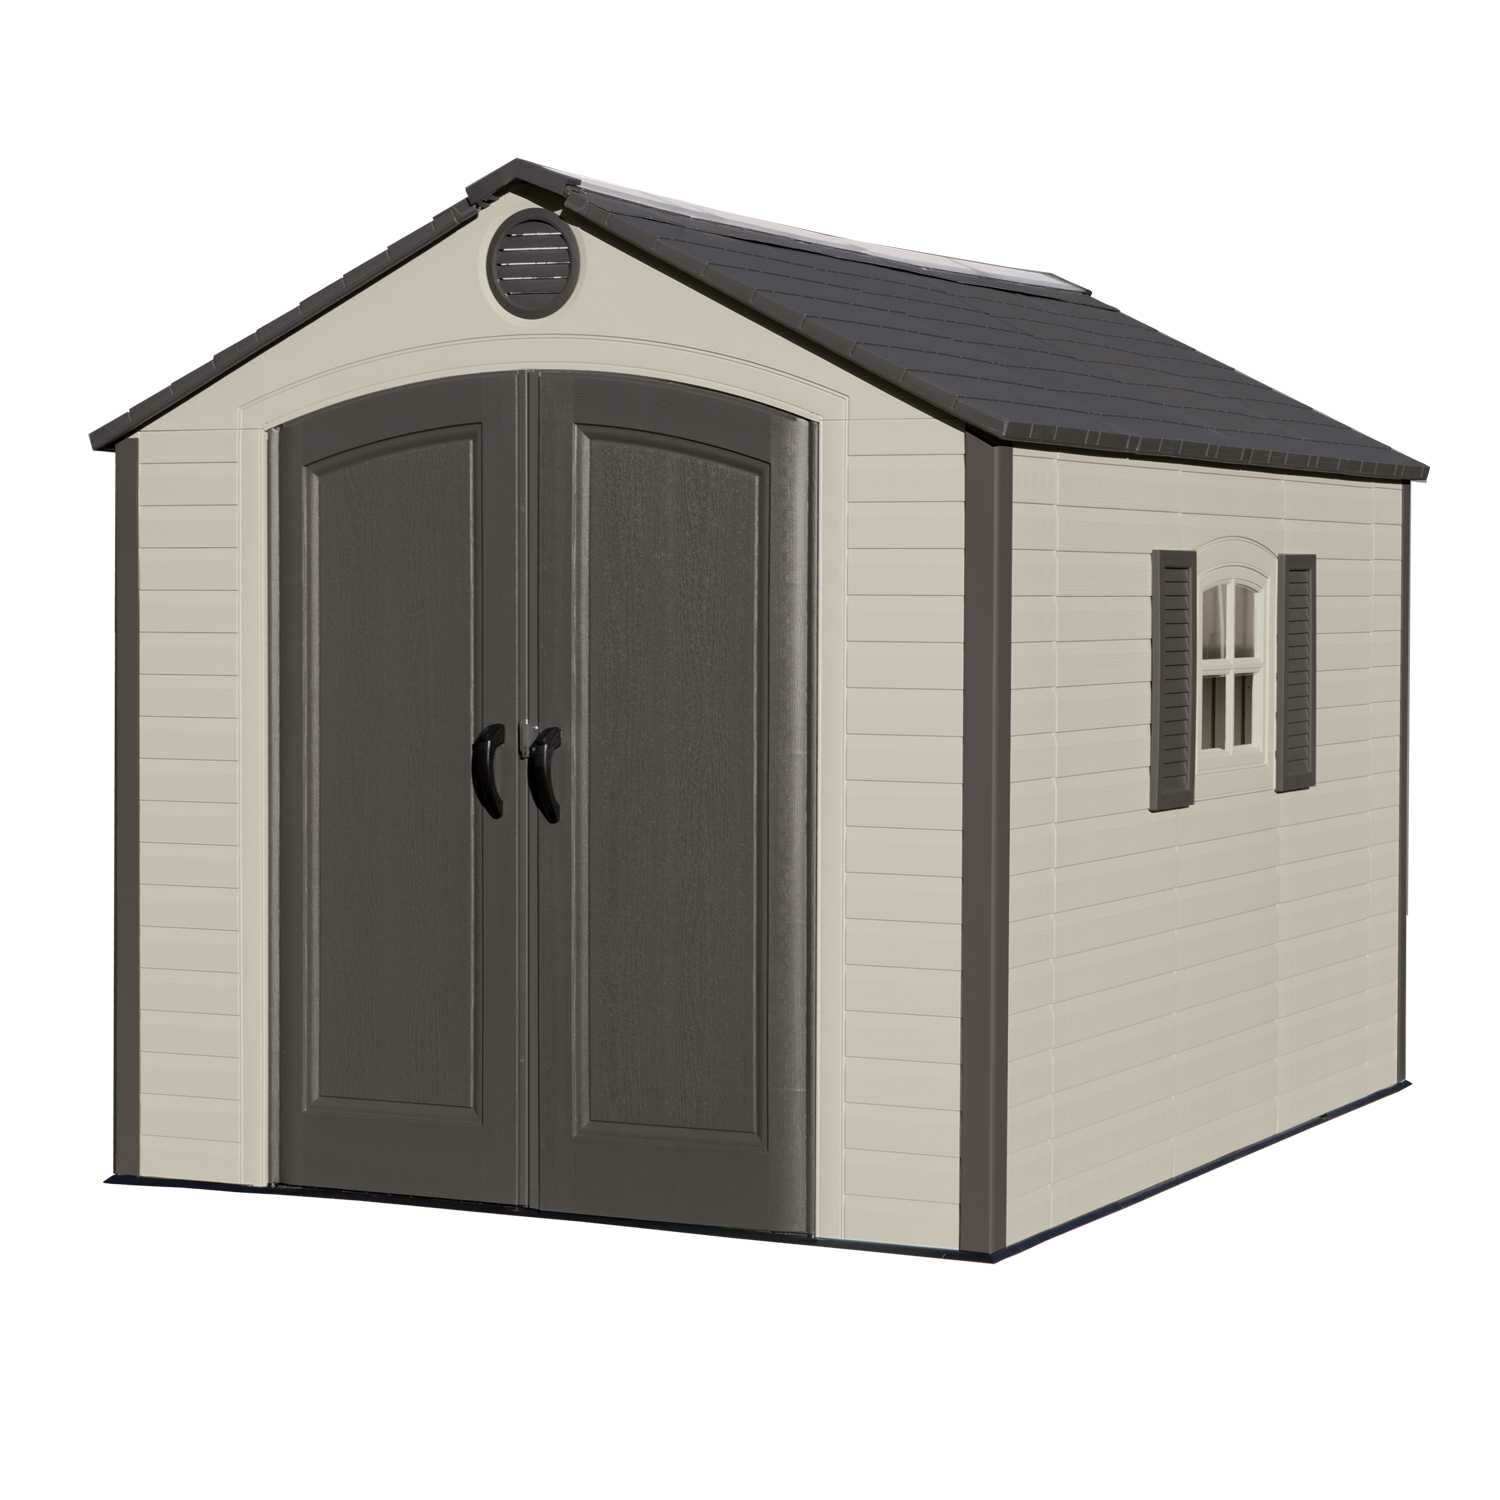 Lifetime 7 Ft 8 In W X 9 Ft 8 In D Plastic Storage Shed